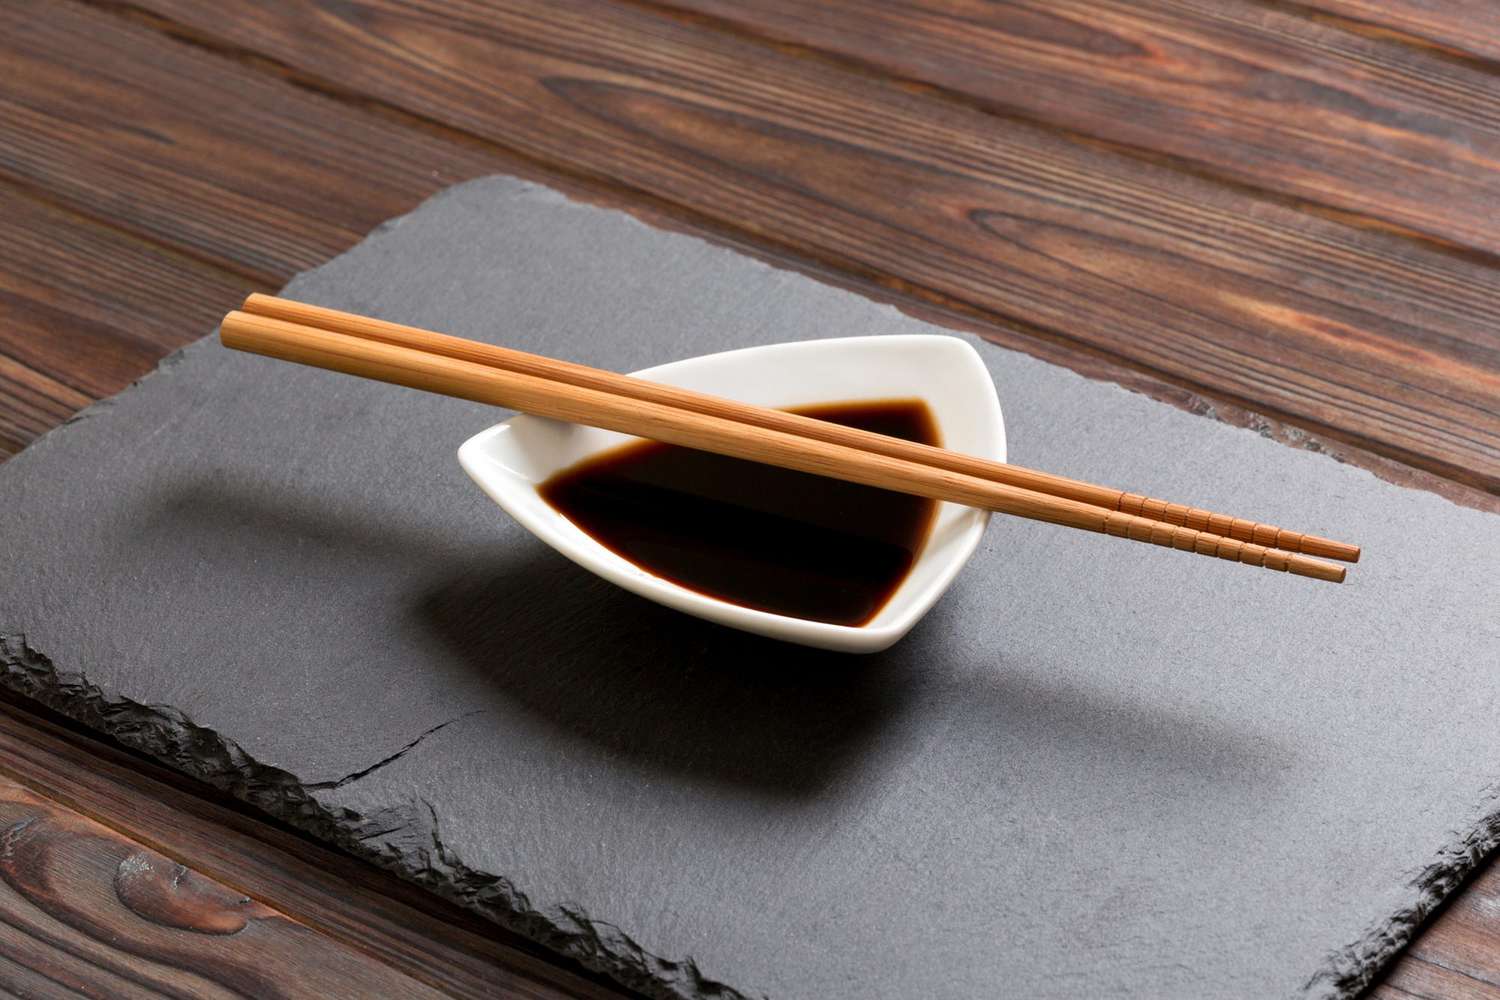 Chopsticks and tamari in a white dish on a wooden background